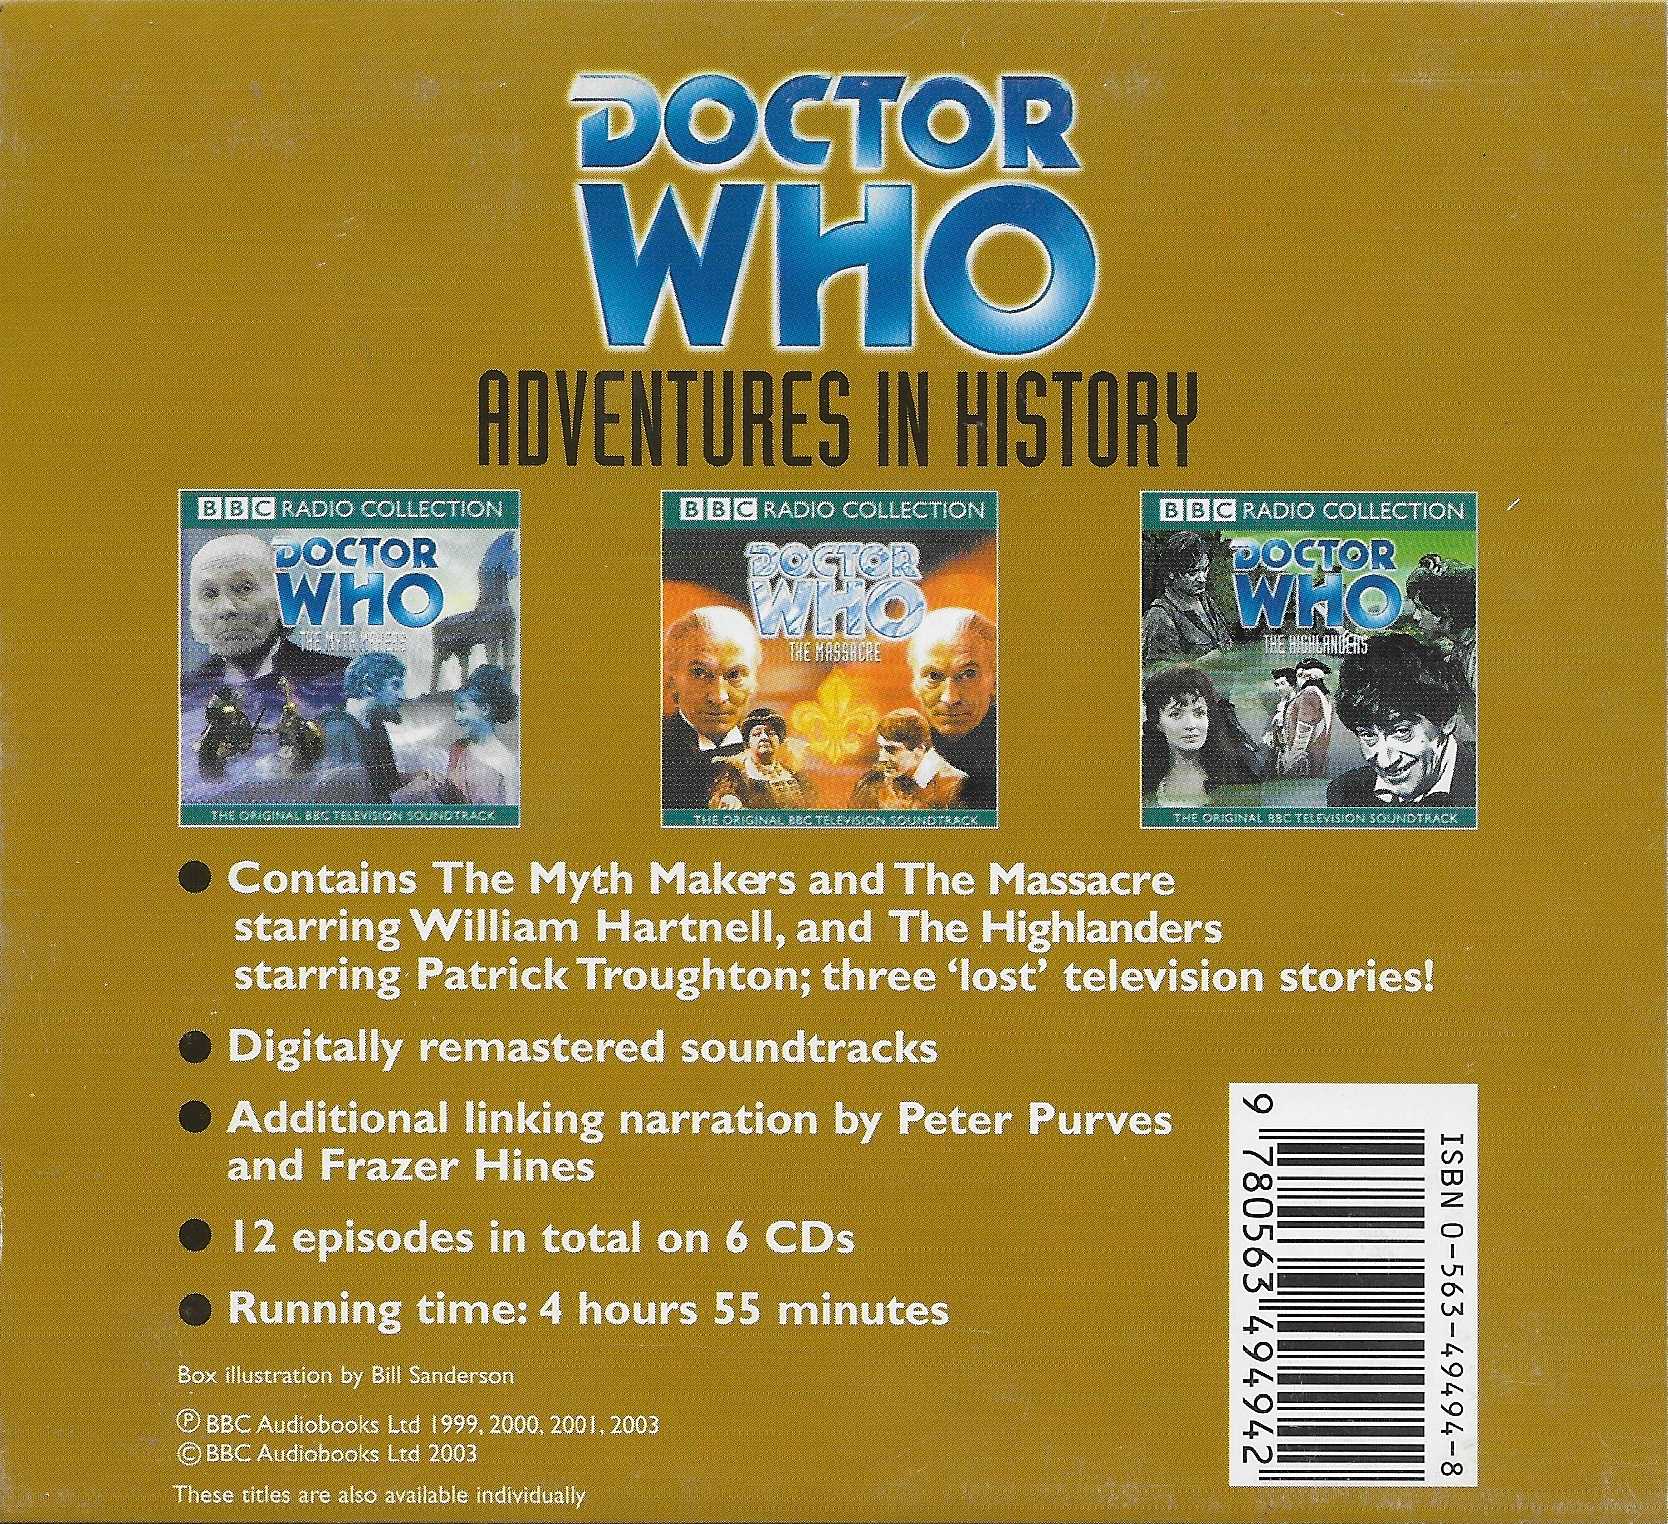 Picture of ISBN 0-563-49494-8 Doctor Who - Adventures in history by artist Donald Cotton / John Lucarotti / Gerry Davis	 from the BBC records and Tapes library